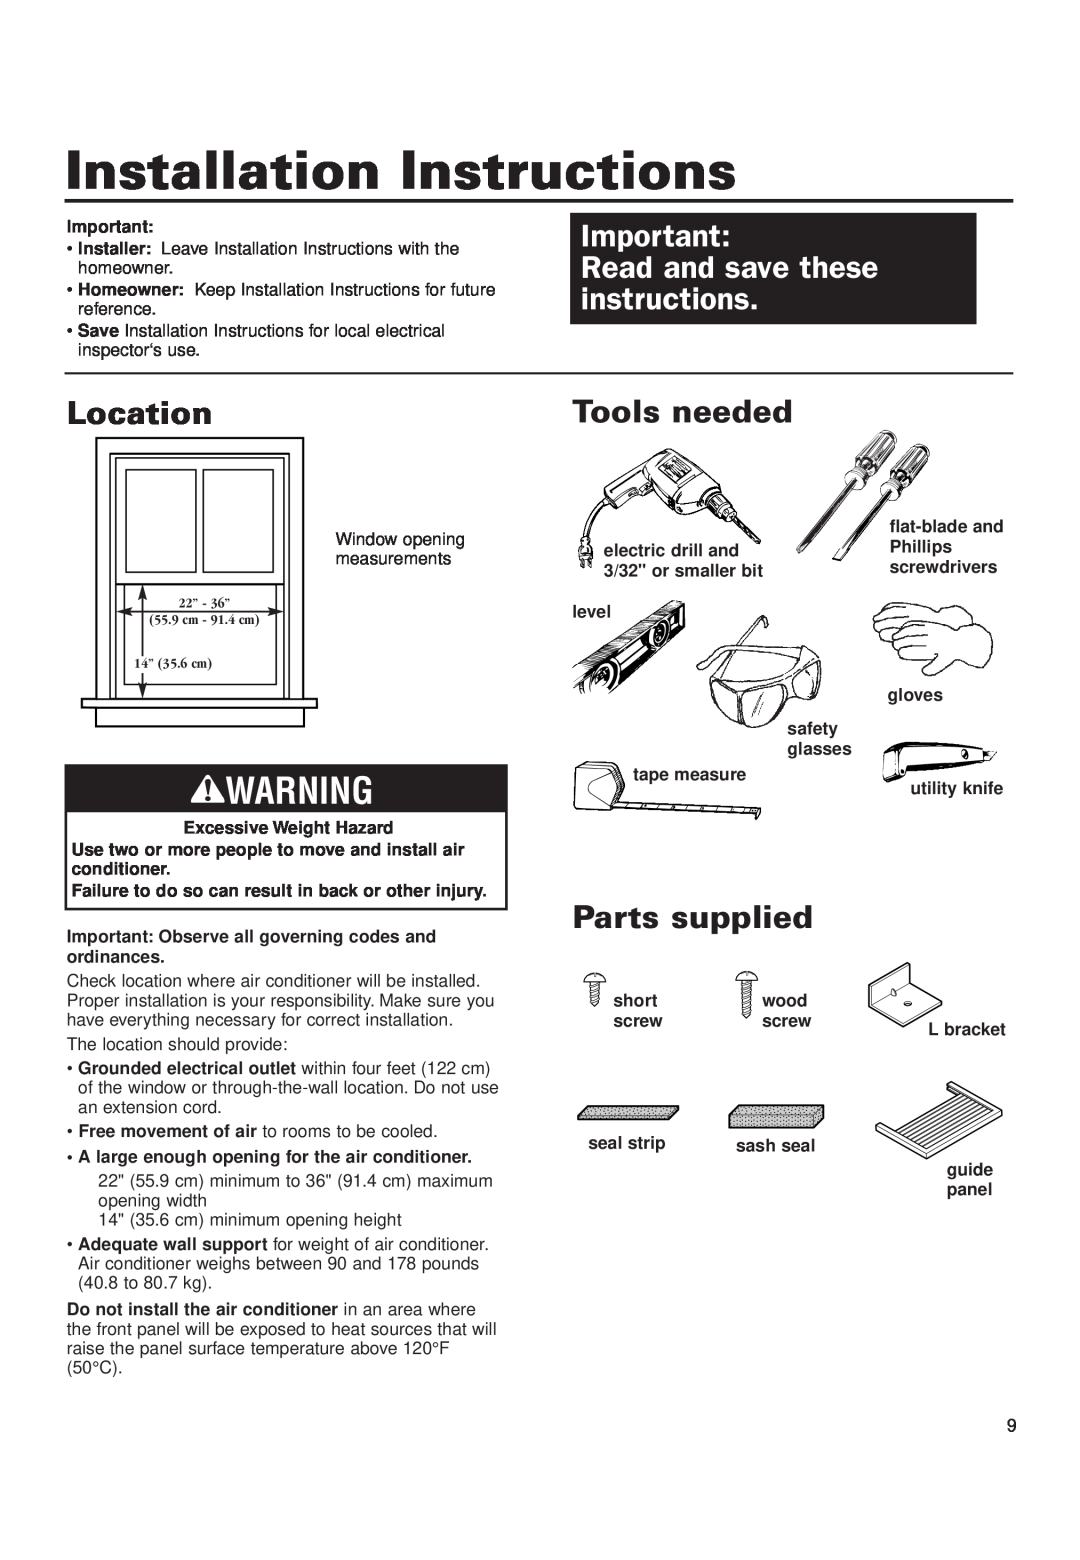 Whirlpool CA5WMK0 Installation Instructions, Read and save these instructions, Location, Tools needed, Parts supplied 